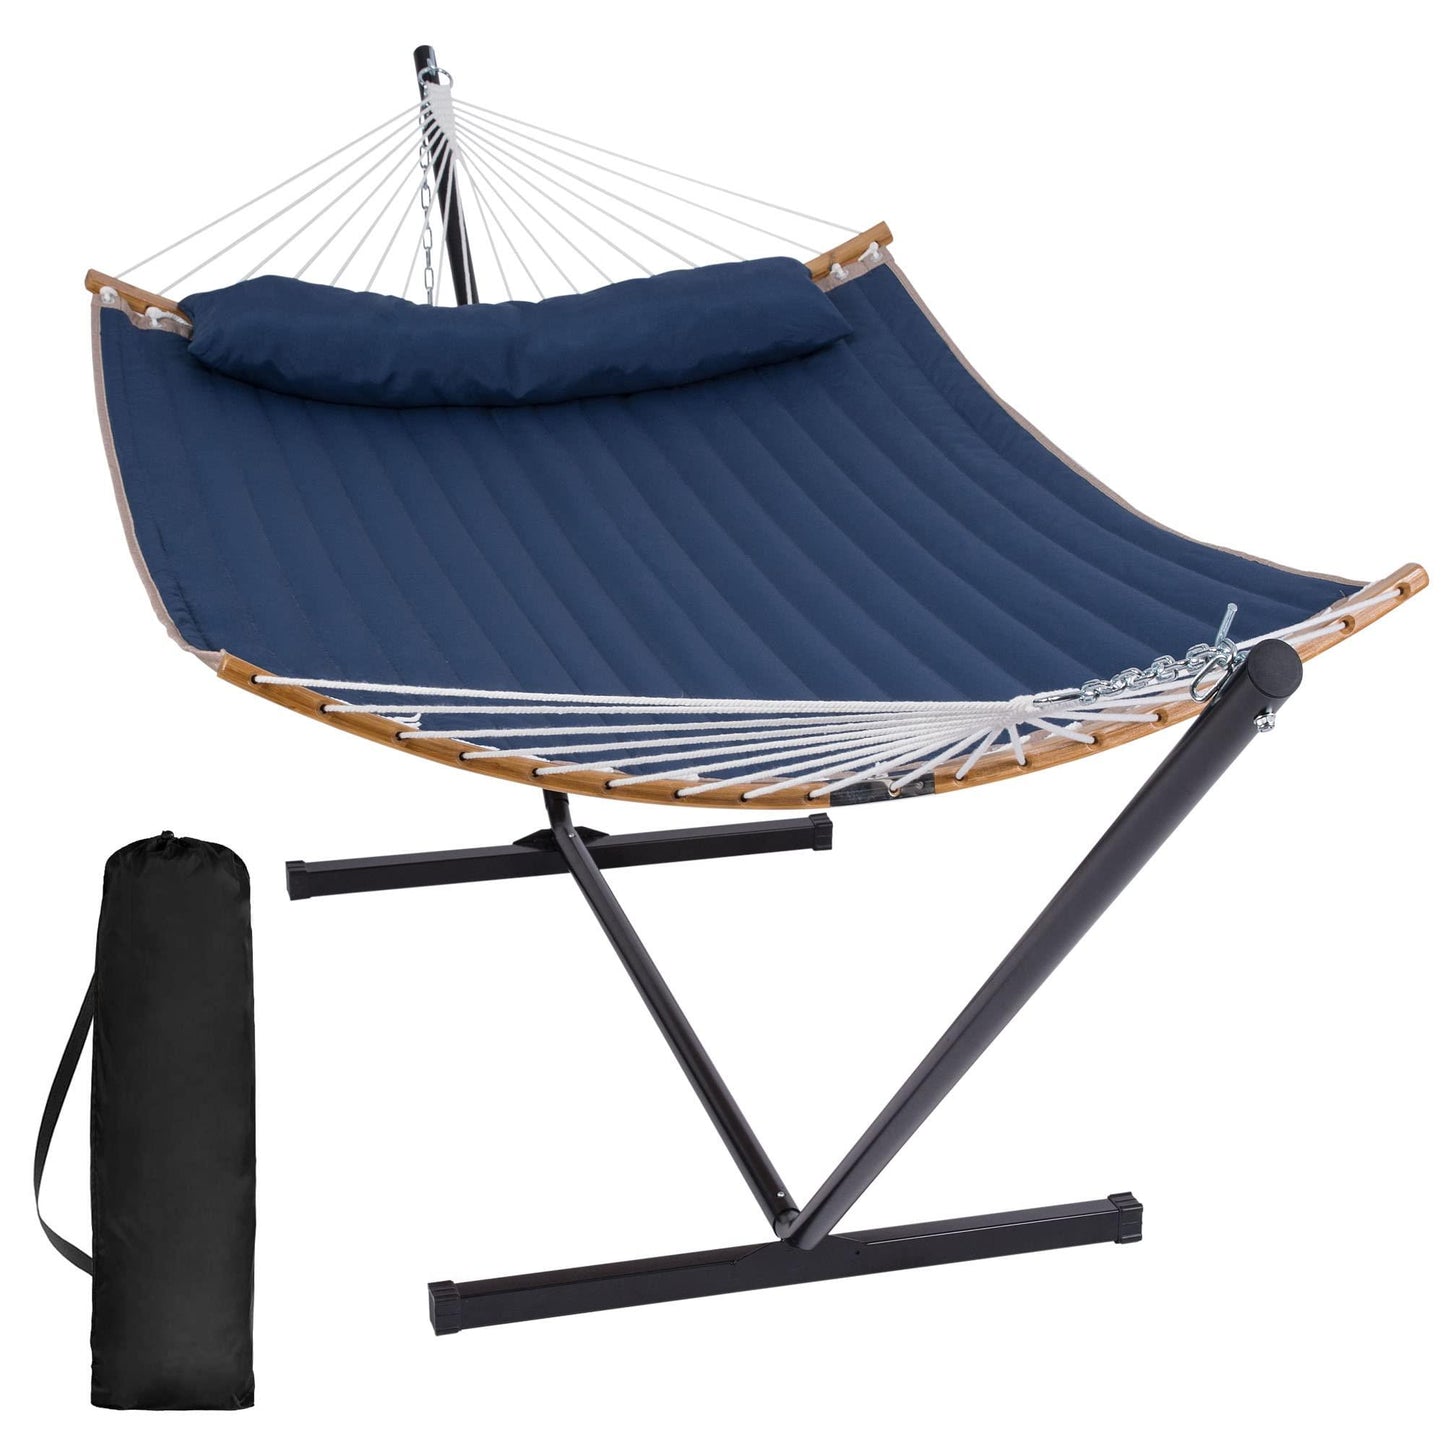 SUNCREAT Outdoor Hammock with Curved Spreader Bar, Patio Double Hammock with Stand, Soft Pillow, 450 lbs Capacity,Dark Blue - CookCave